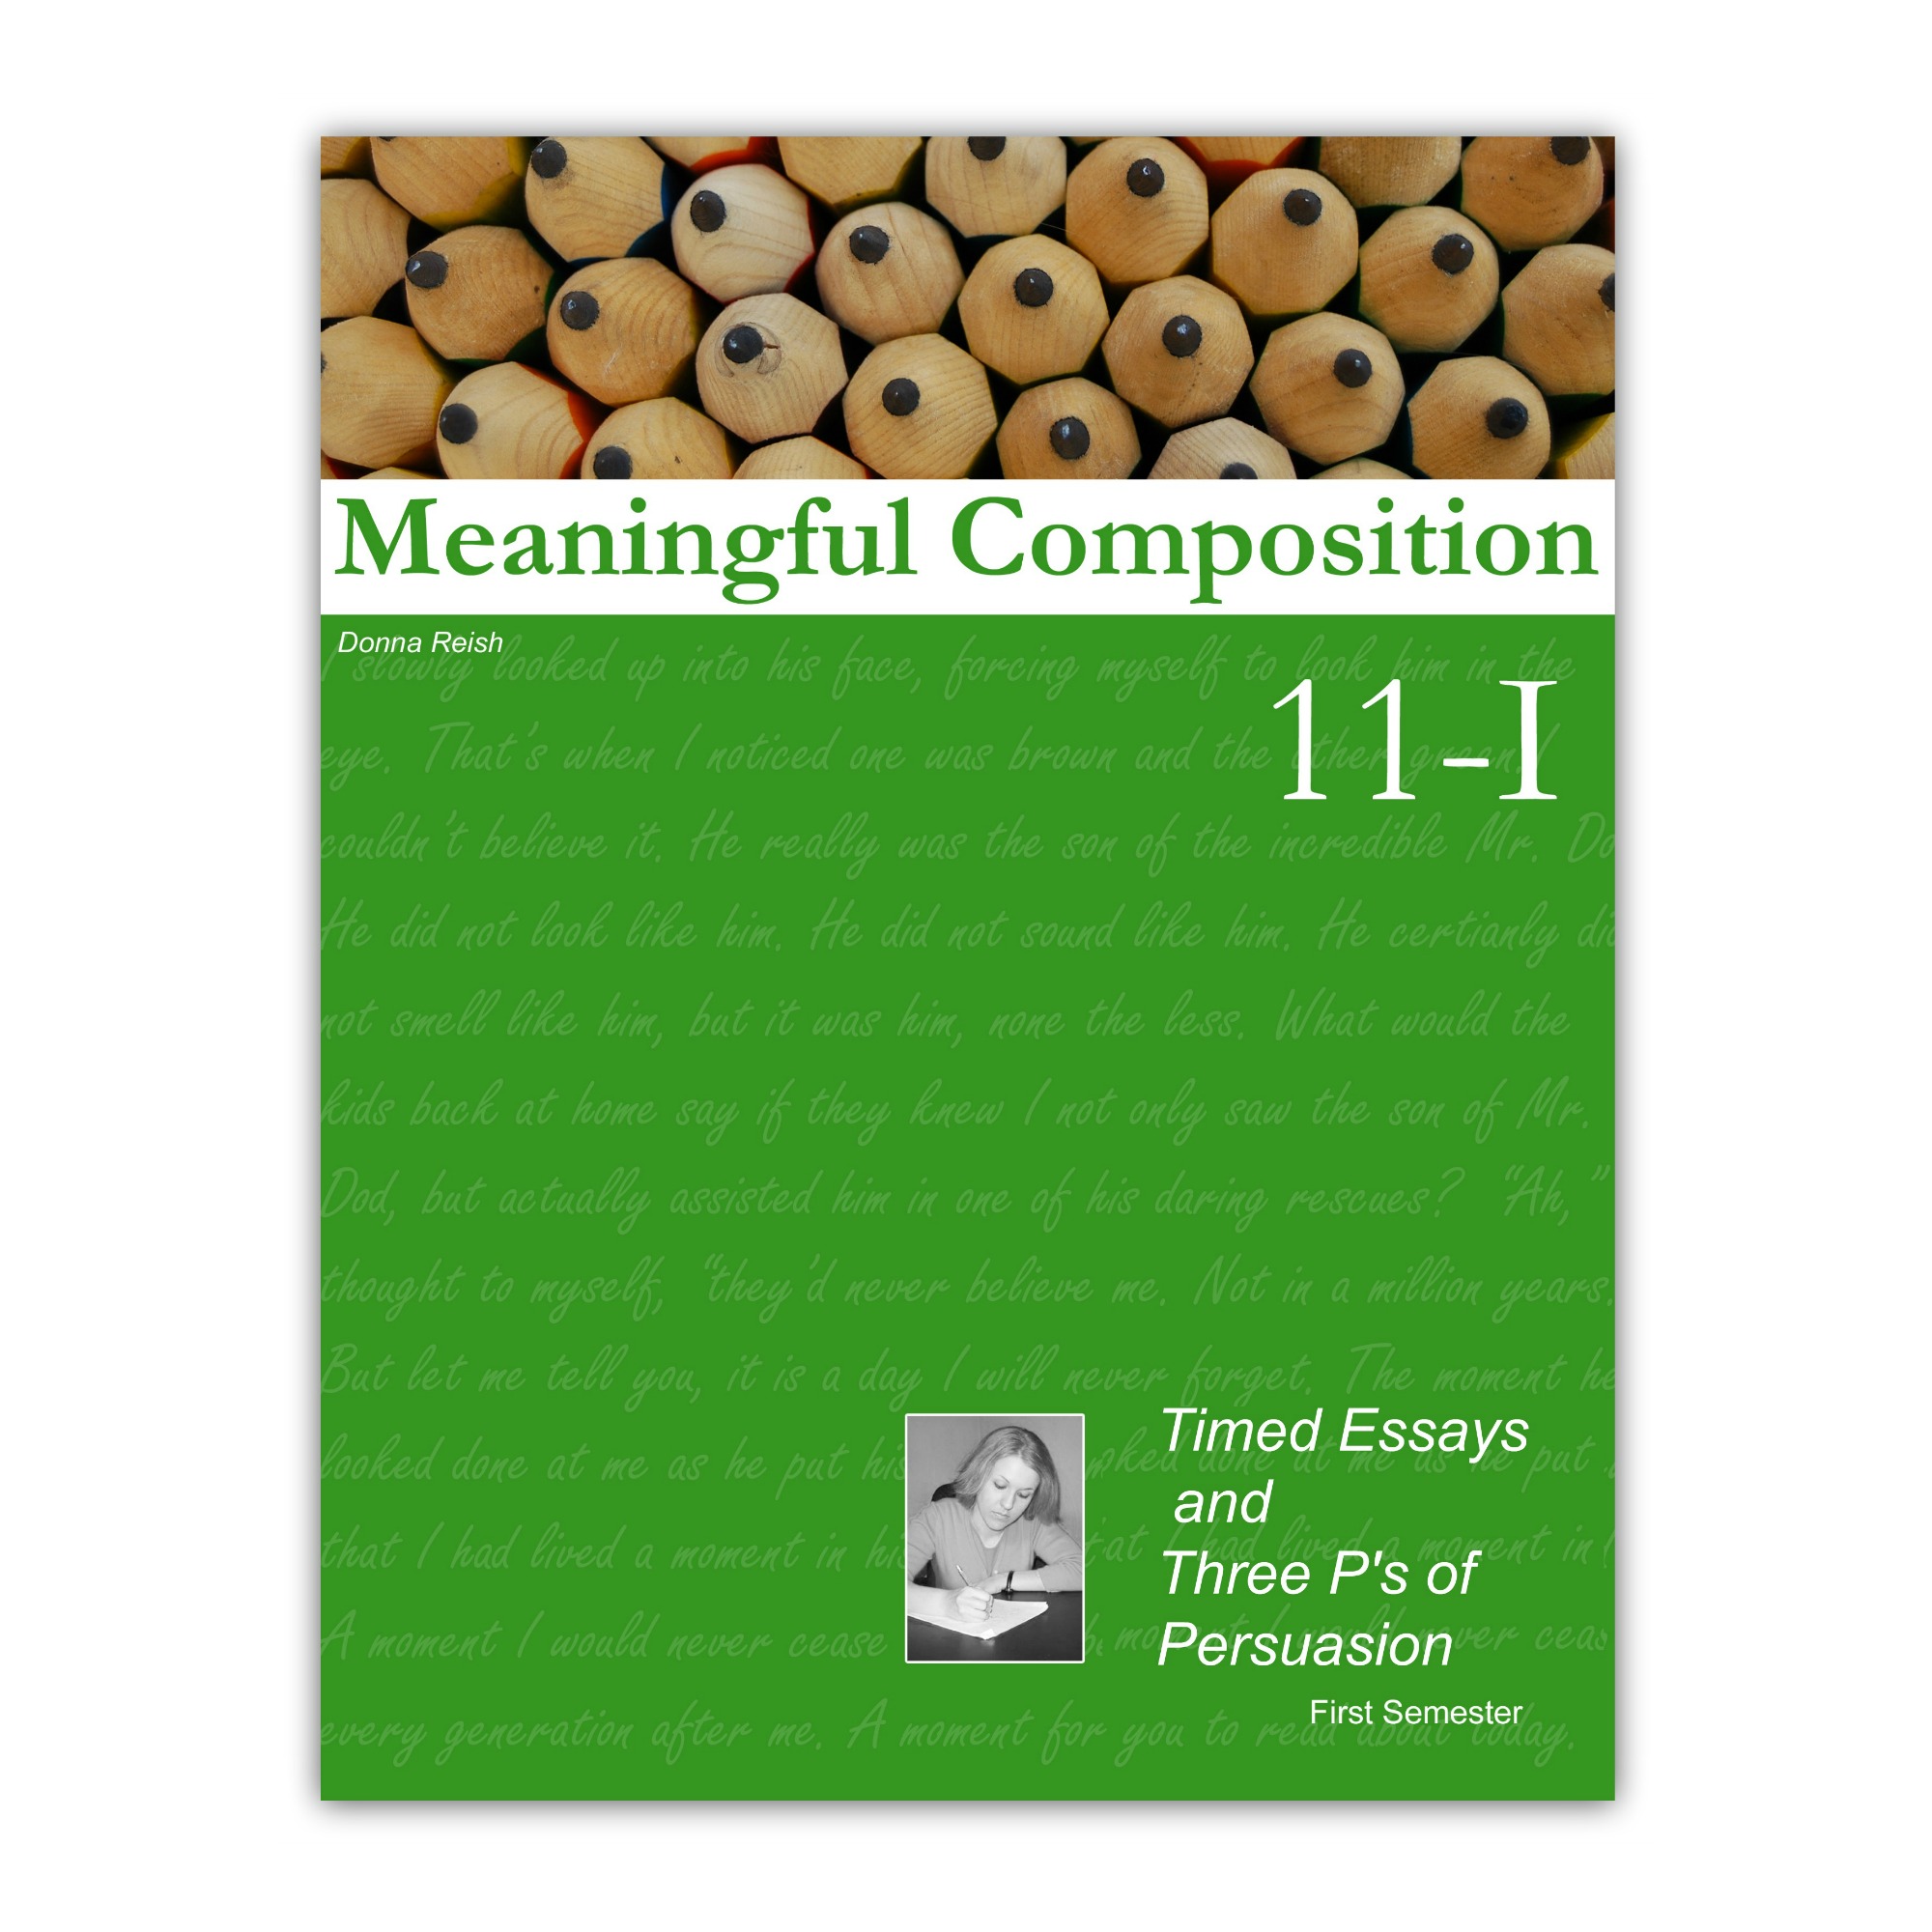 Meaningful Composition 11 I: Timed Essays and Three P's of Persuasion